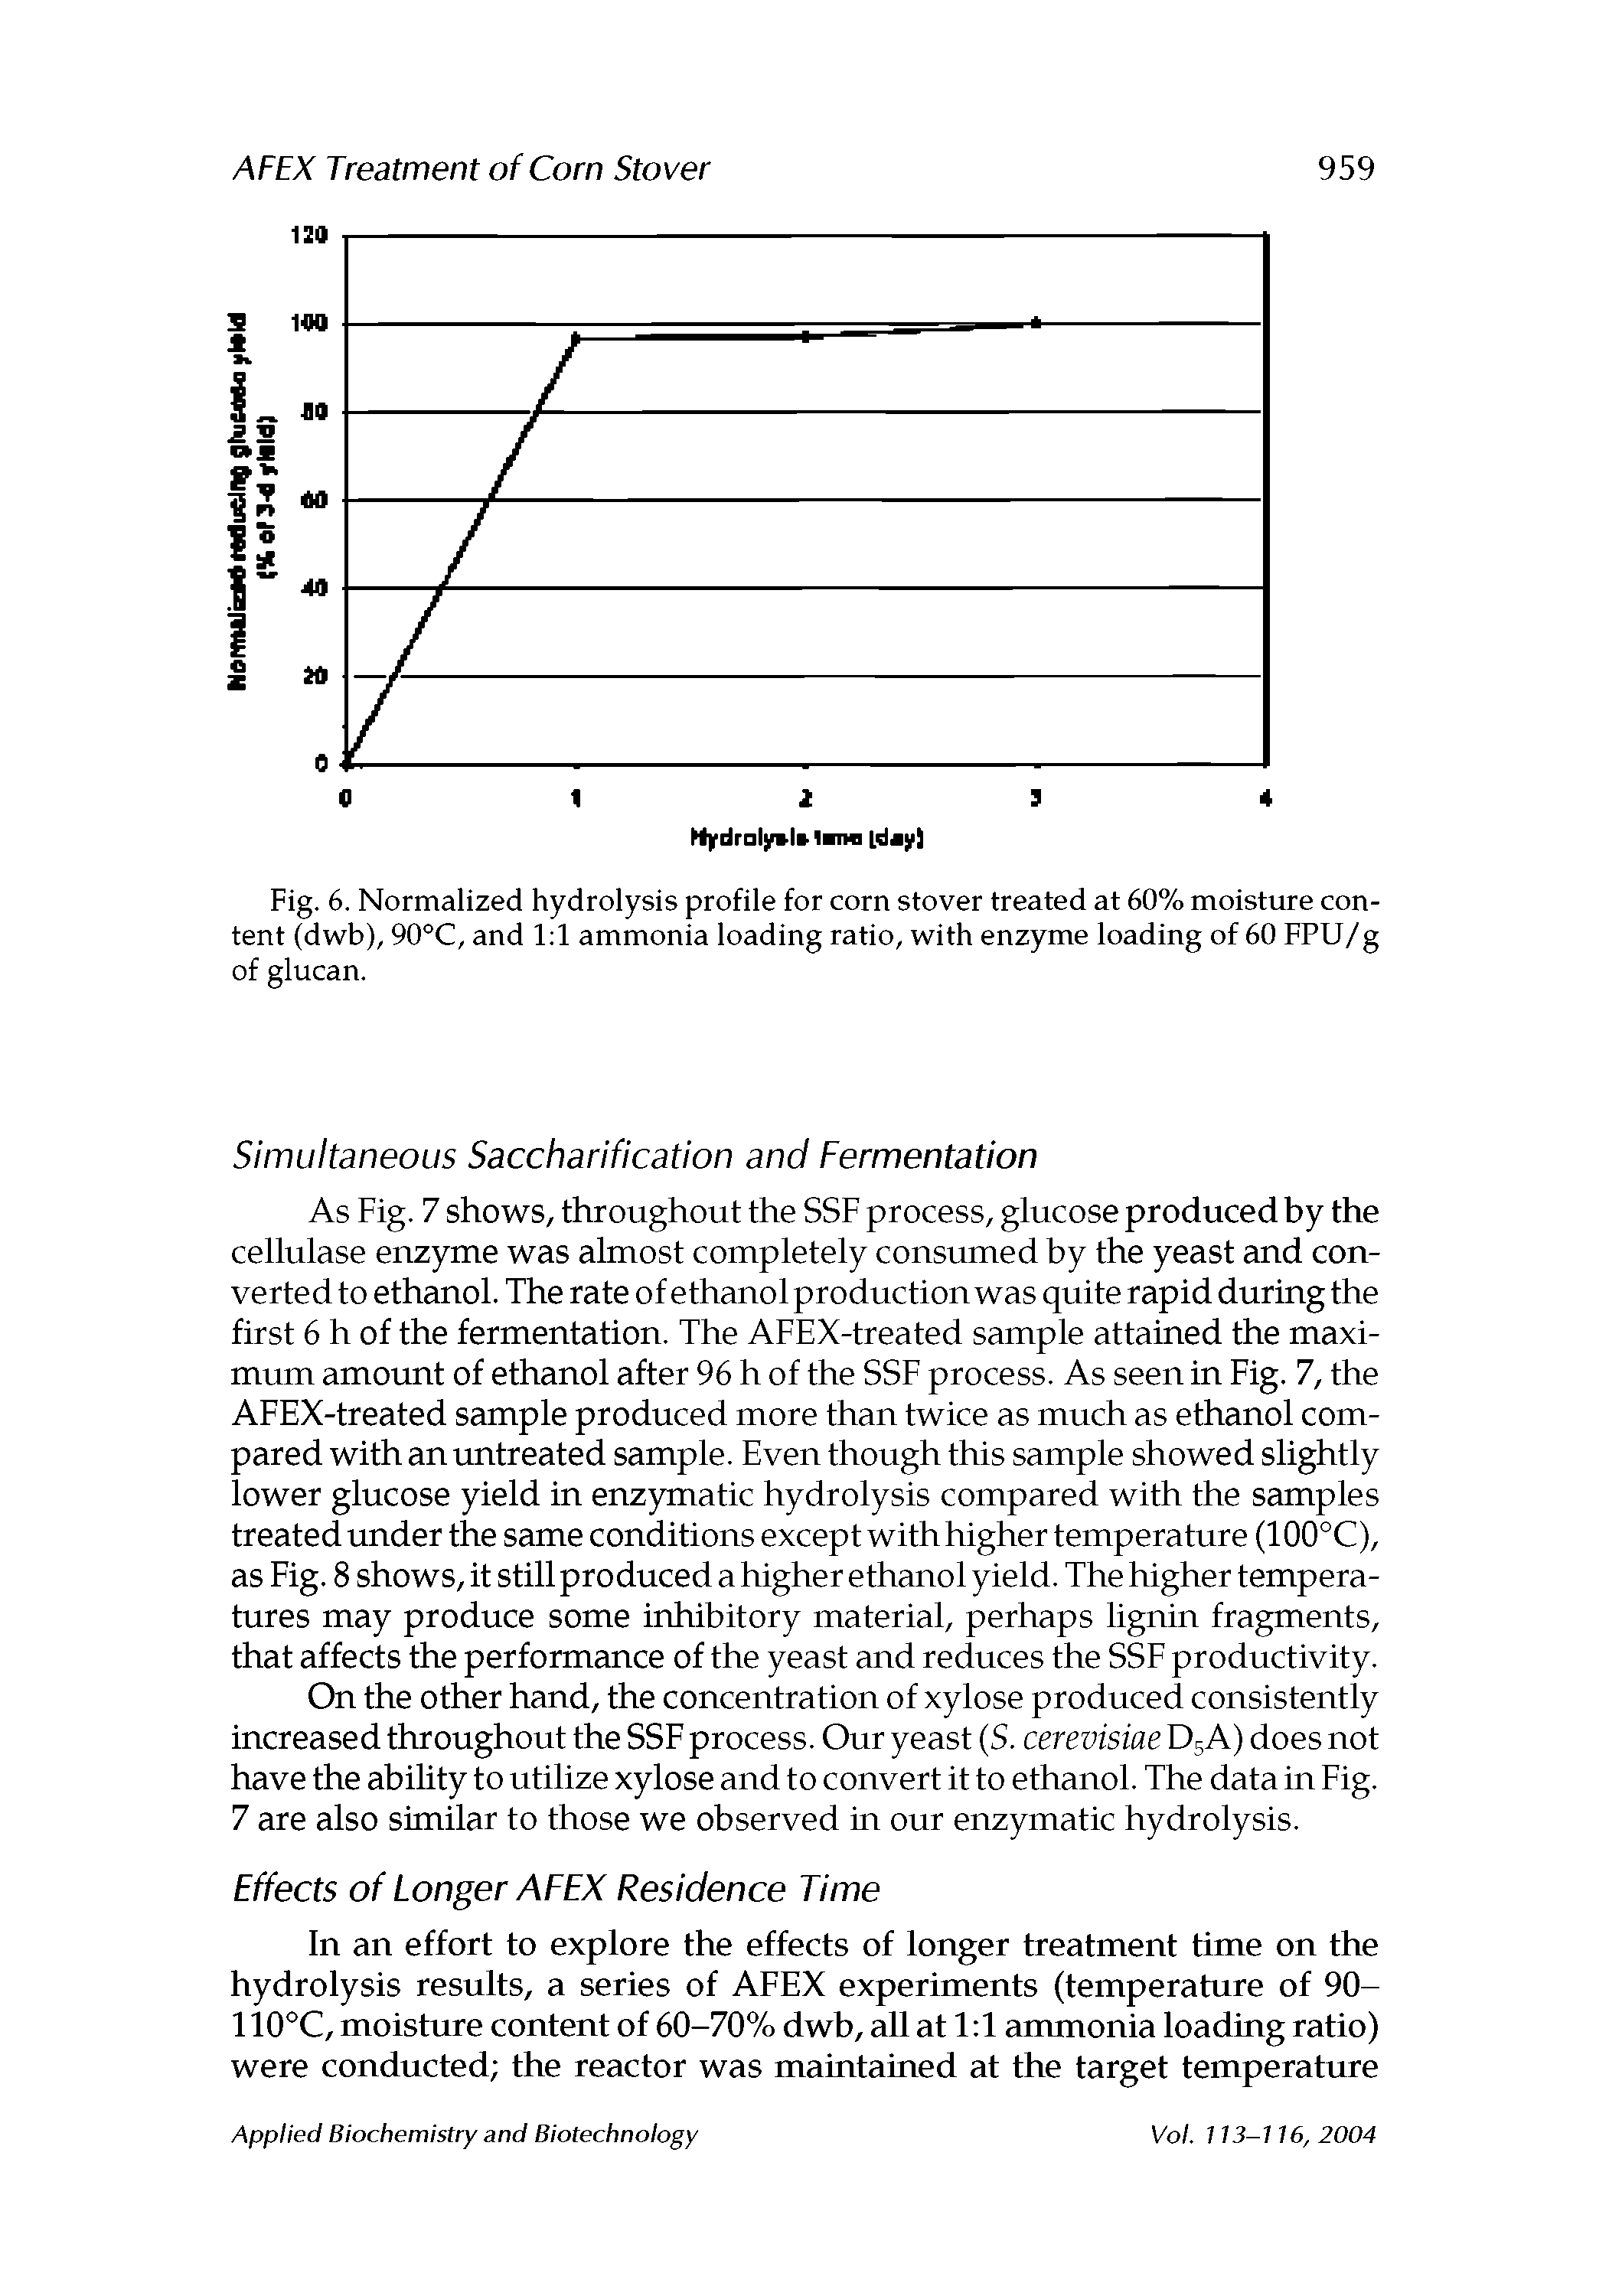 Fig. 6. Normalized hydrolysis profile for corn stover treated at 60% moisture content (dwb), 90°C, and 1 1 ammonia loading ratio, with enzyme loading of 60 FPU/g of glucan.